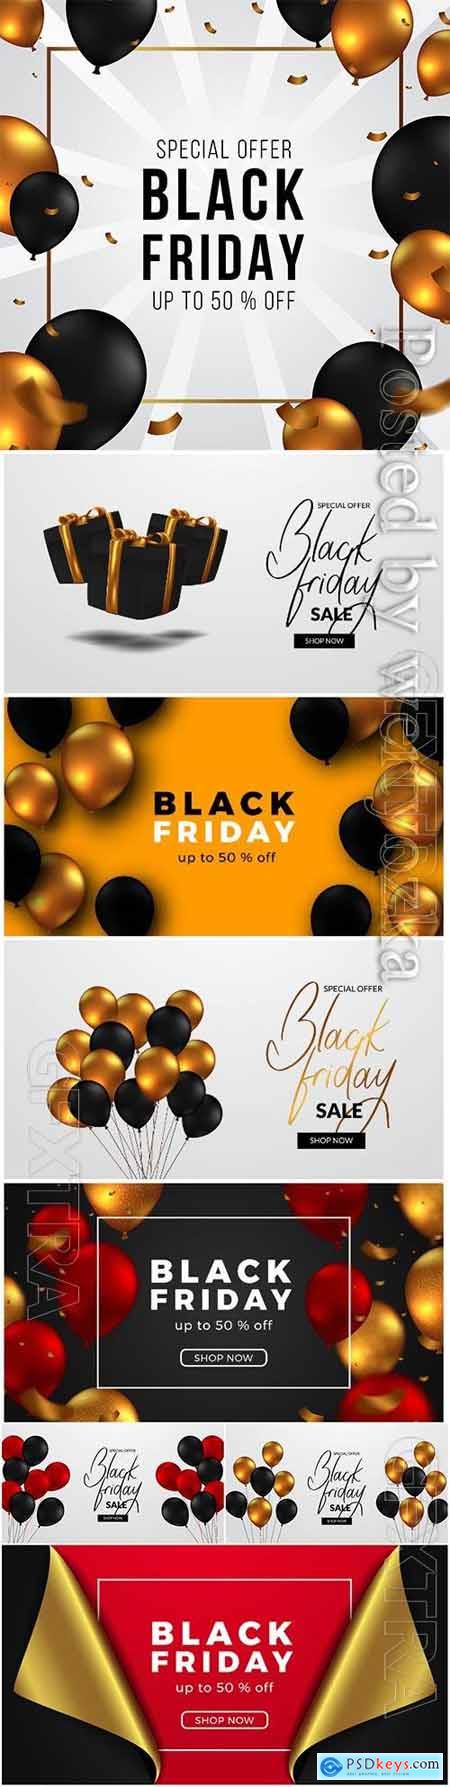 Black friday sale, red and golden balloon premium vector